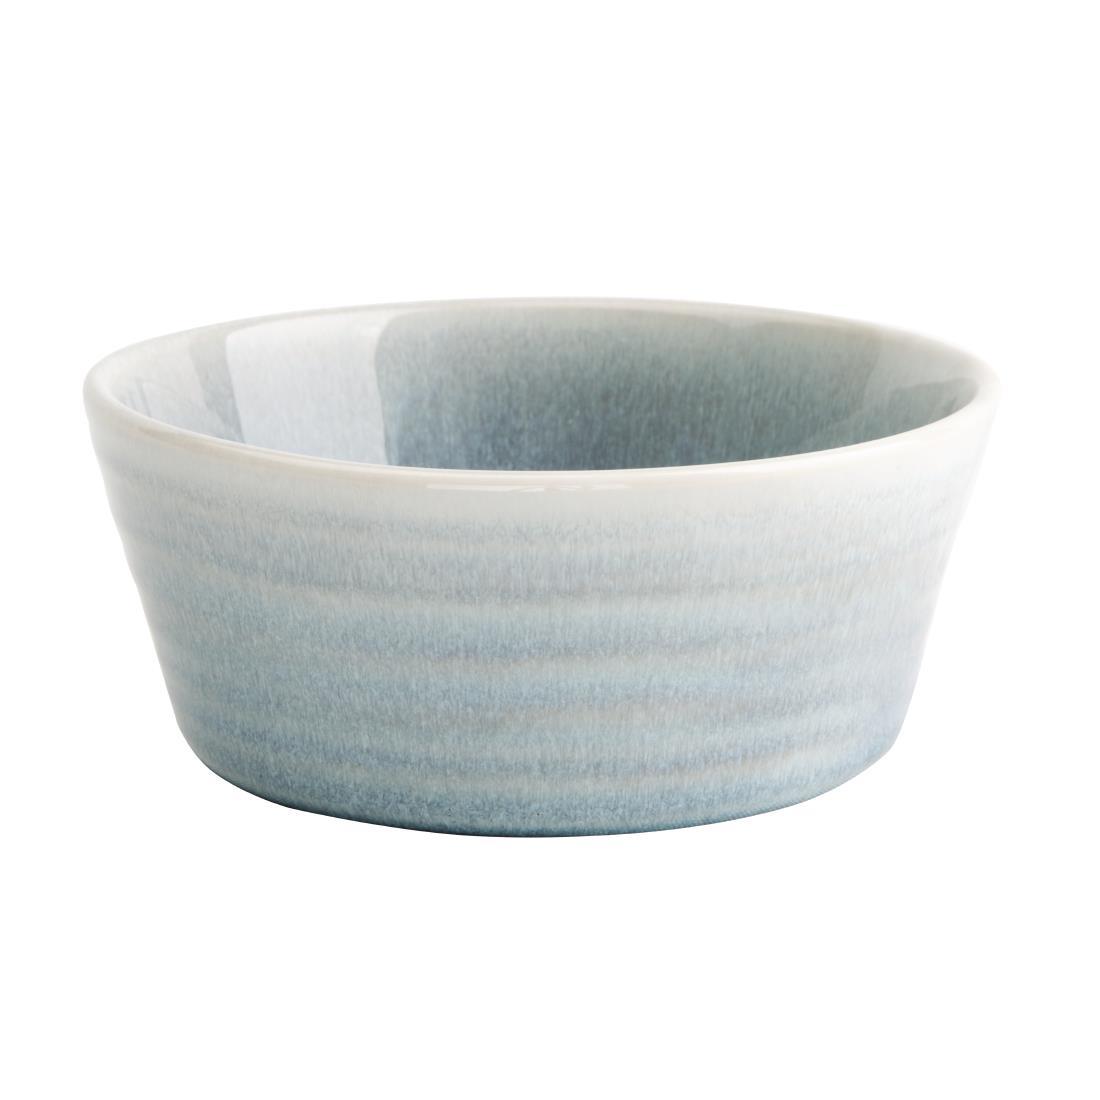 Olympia Cavolo Flat Round Bowls Ice Blue 143mm (Pack of 6) - FB565  - 1